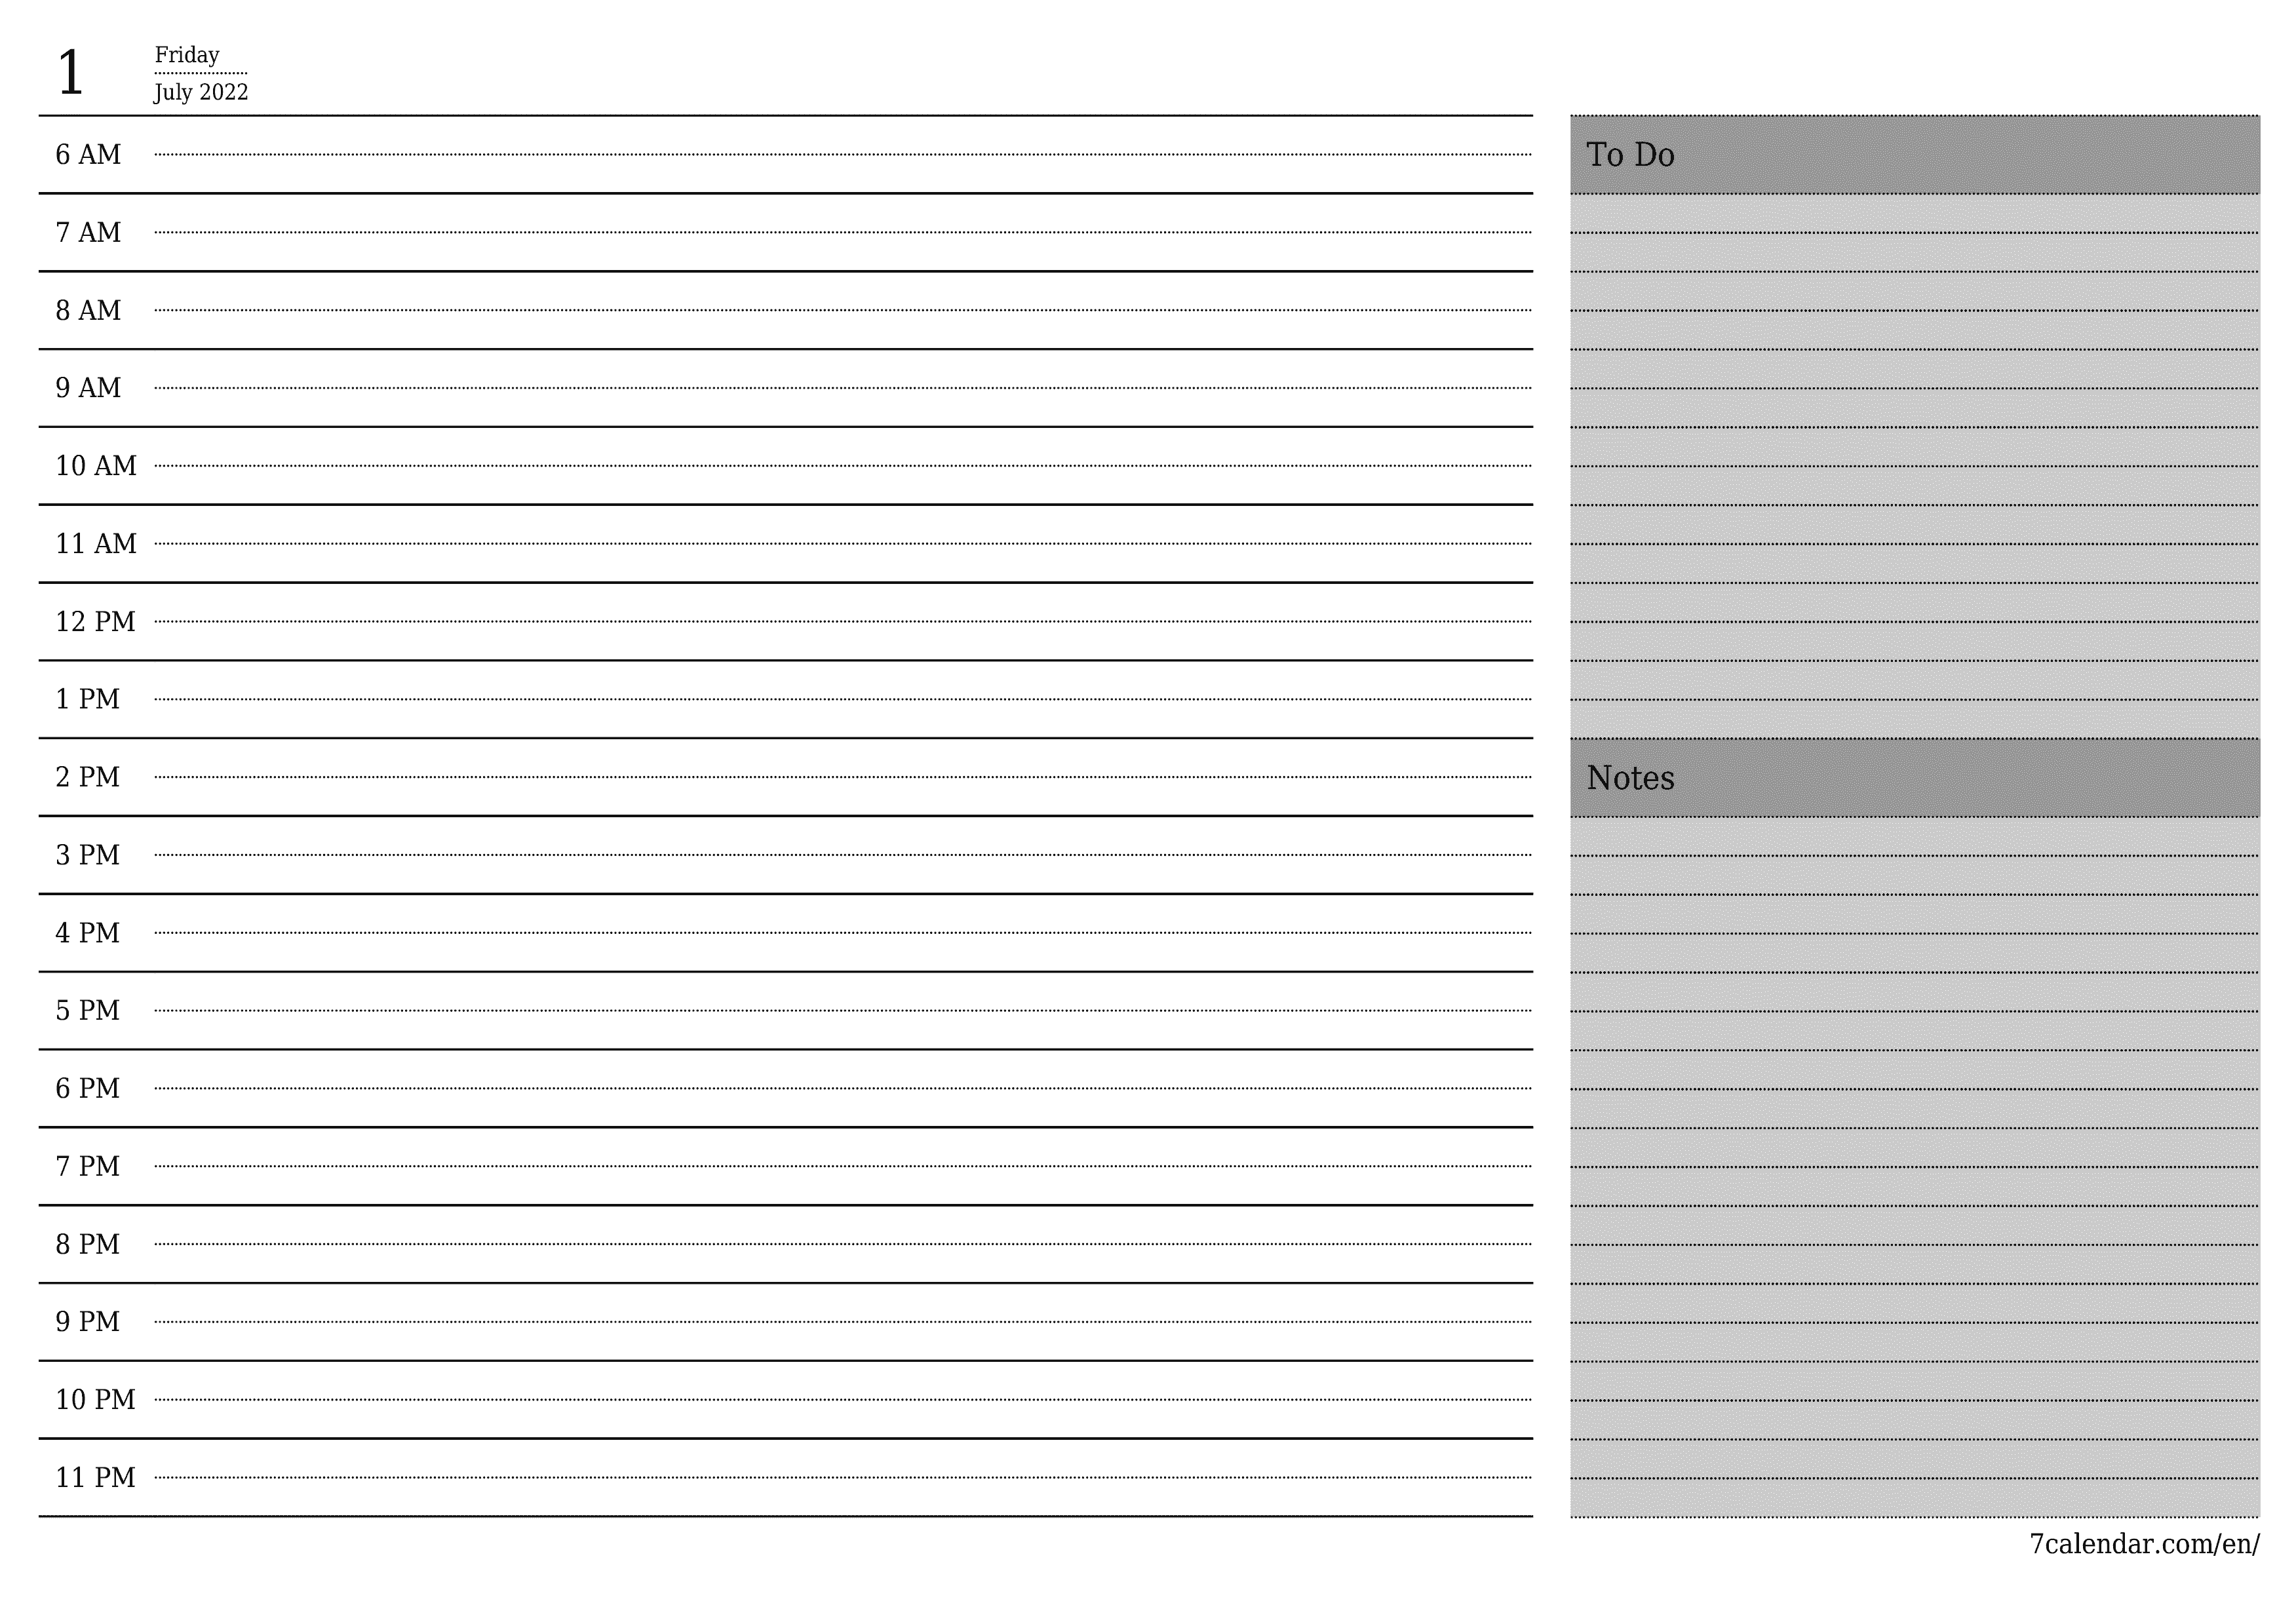 Blank daily calendar planner for day July 2022 with notes, save and print to PDF PNG English - 7calendar.com